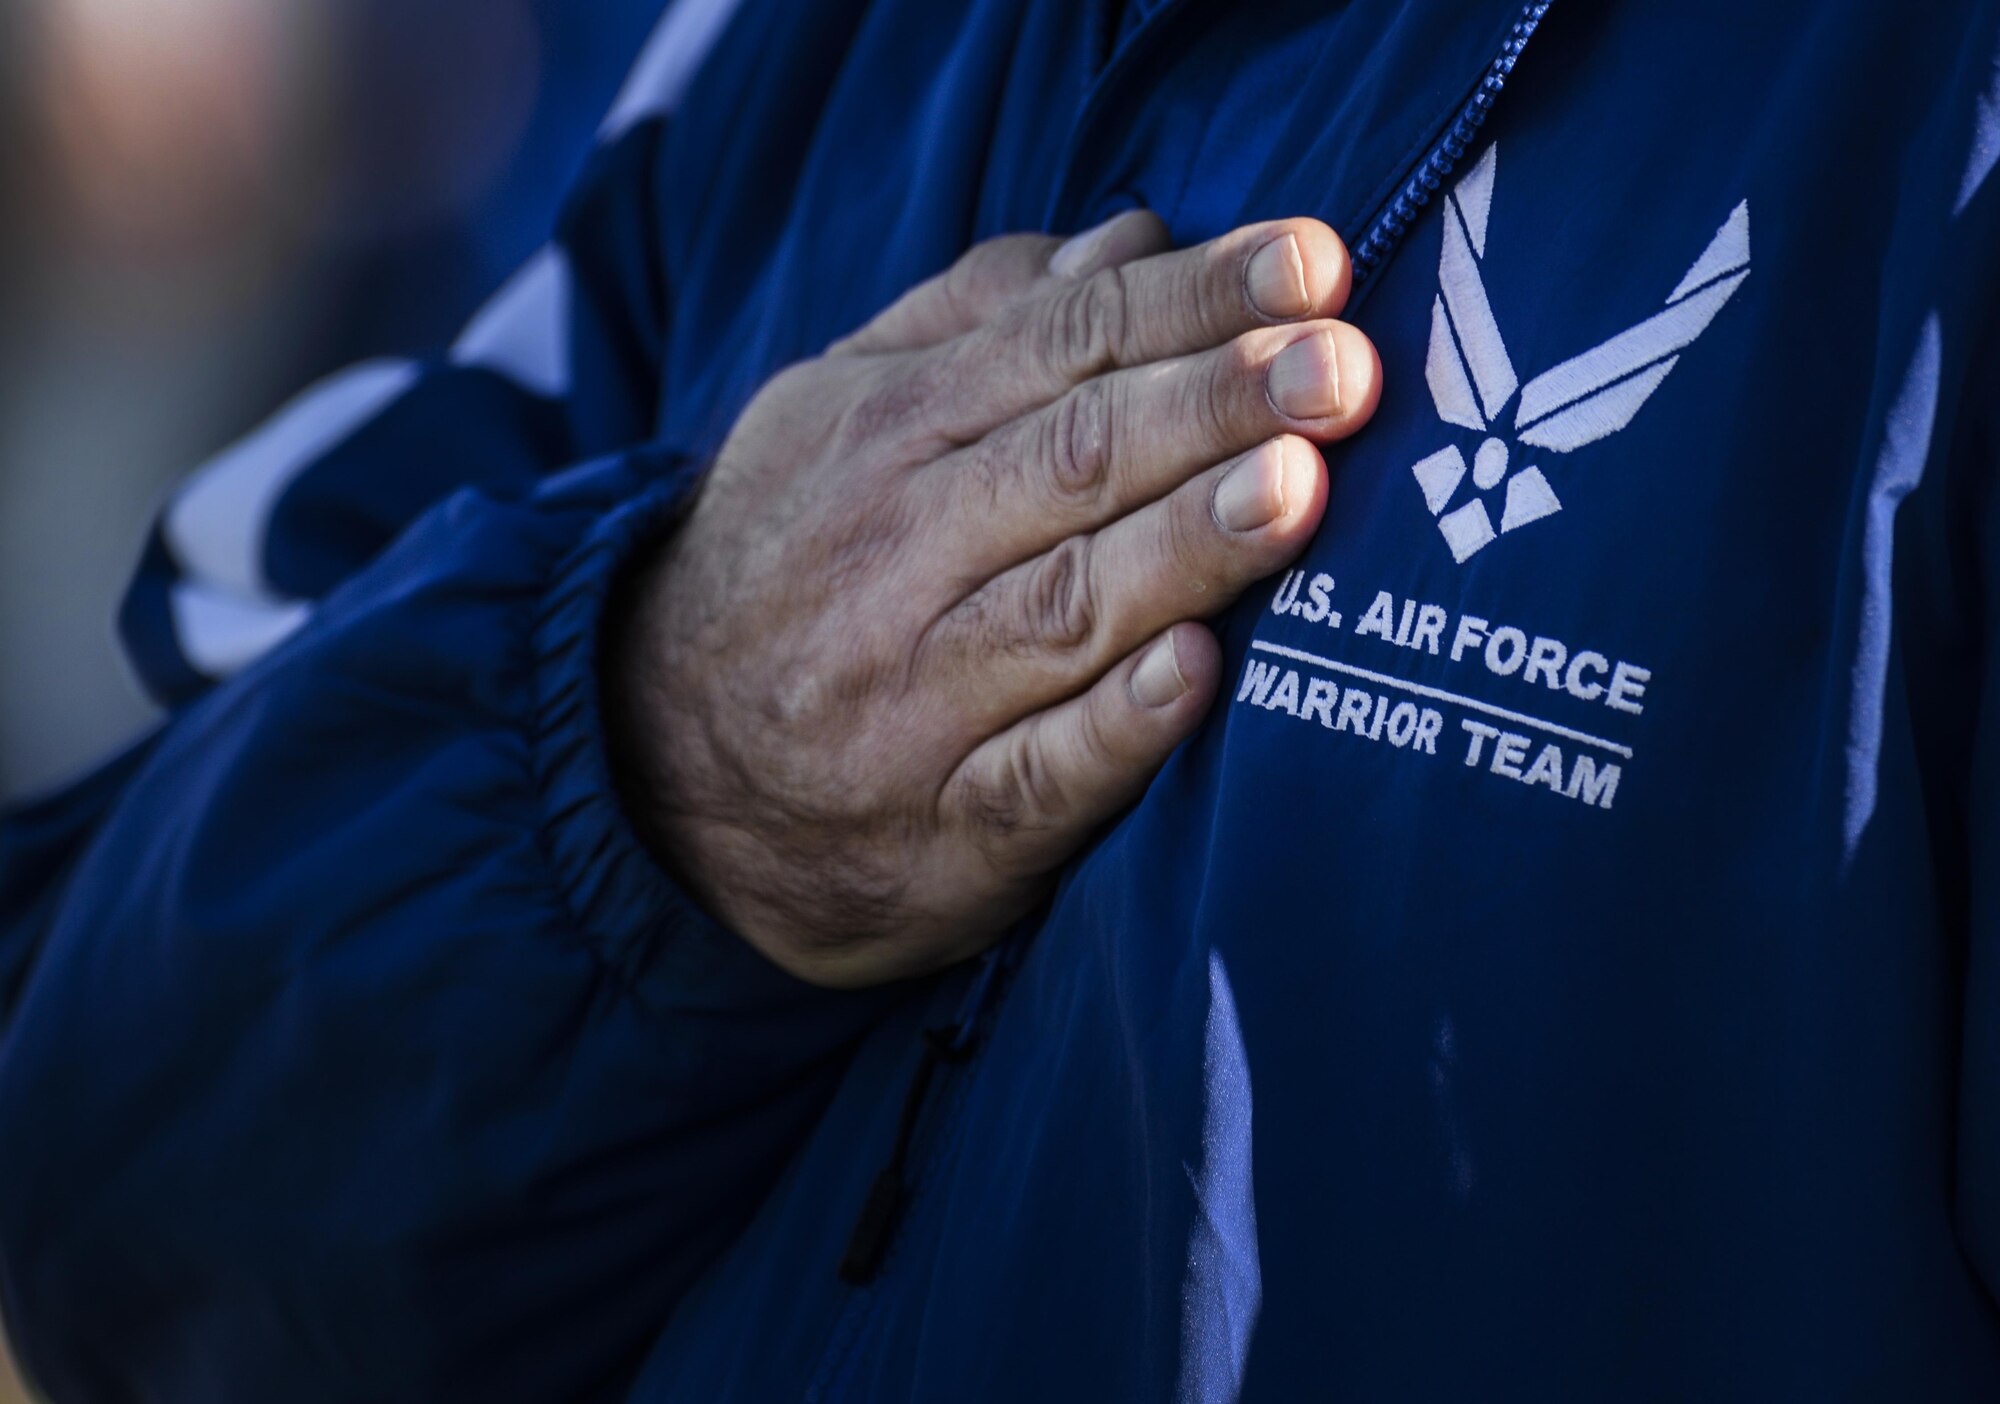 Member of the American Team hold his hand over his heart during the opening ceremonies at the 2016 Air Force Wounded Warrior Trials Feb. 26, at Nellis Air Force Base. More than 100 wounded, ill or injured service members from around the country along with their support teams have gathered for the Trials. (U.S. Air Force photo by Airman 1st Class Kevin Tanenbaum)